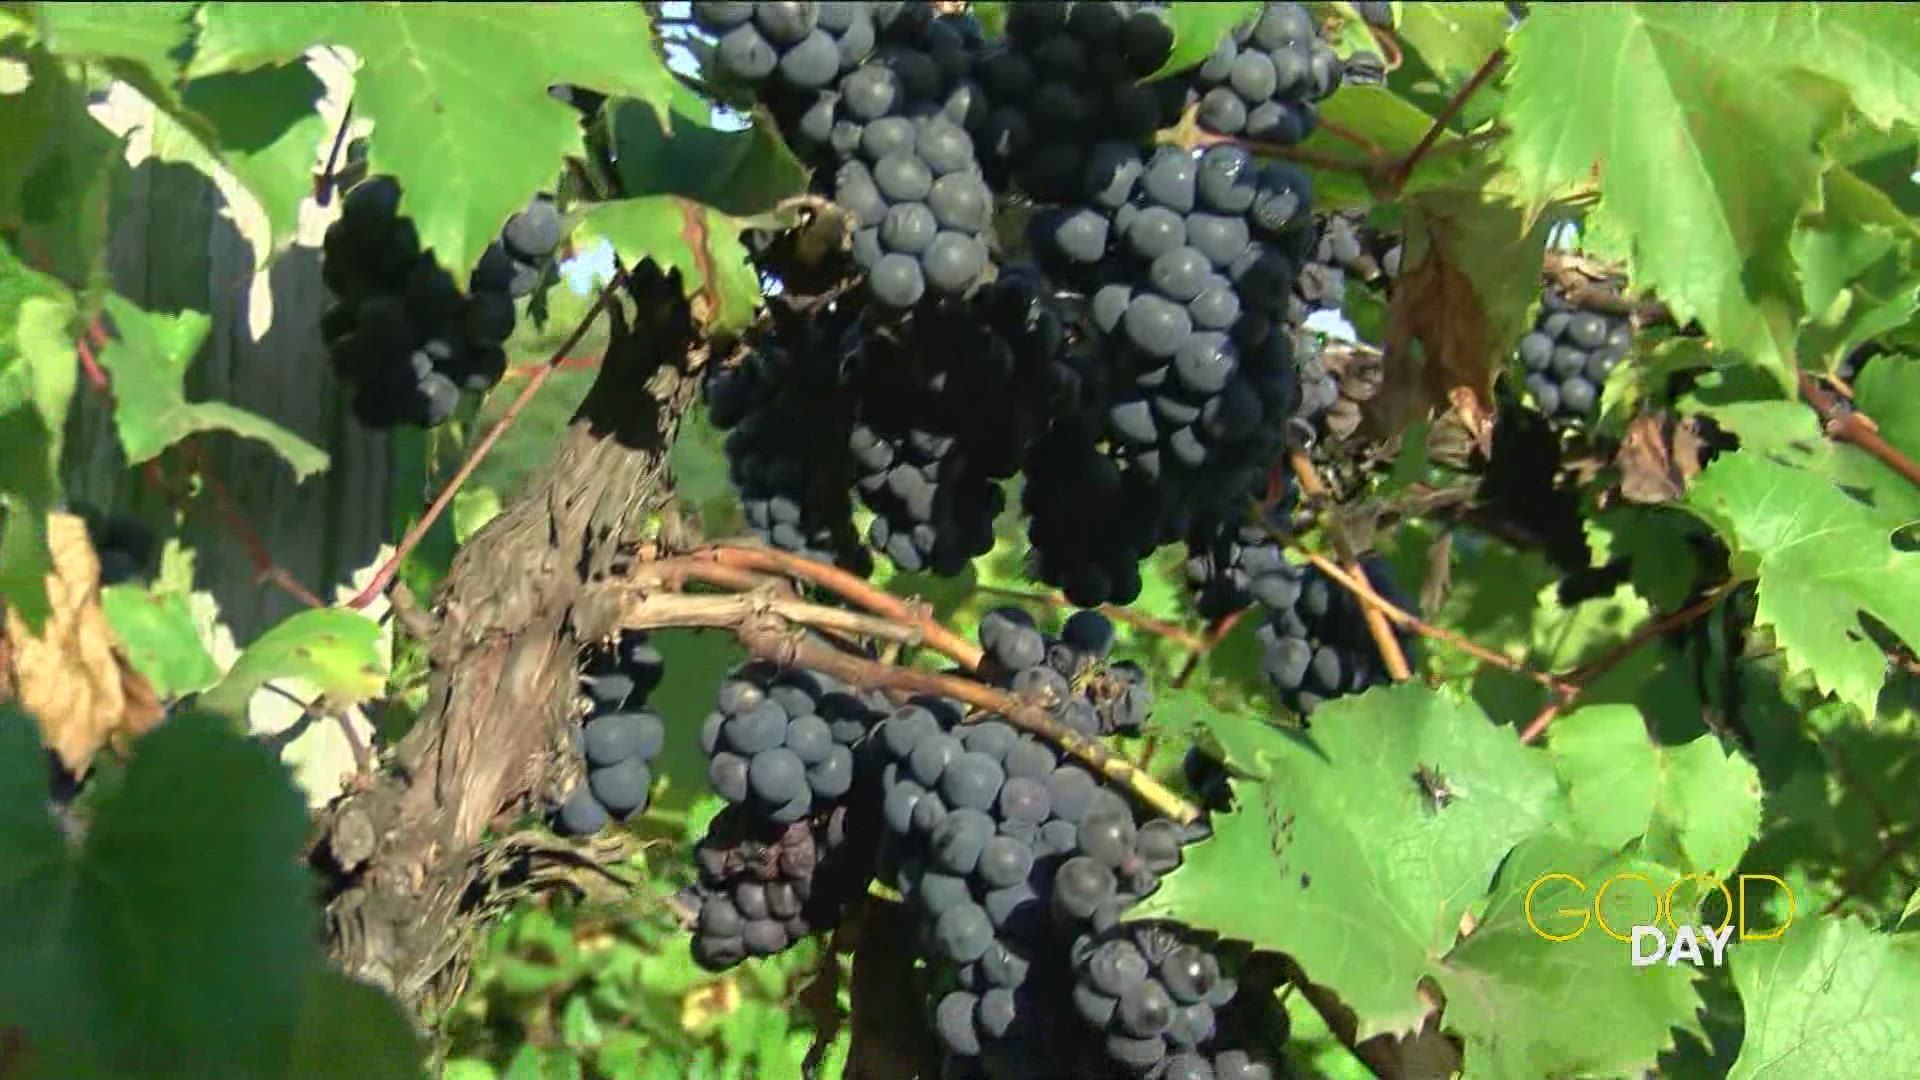 Diane visits the Flying Otter Winery in Adrian, Michigan to learn about the autumn grape harvest.